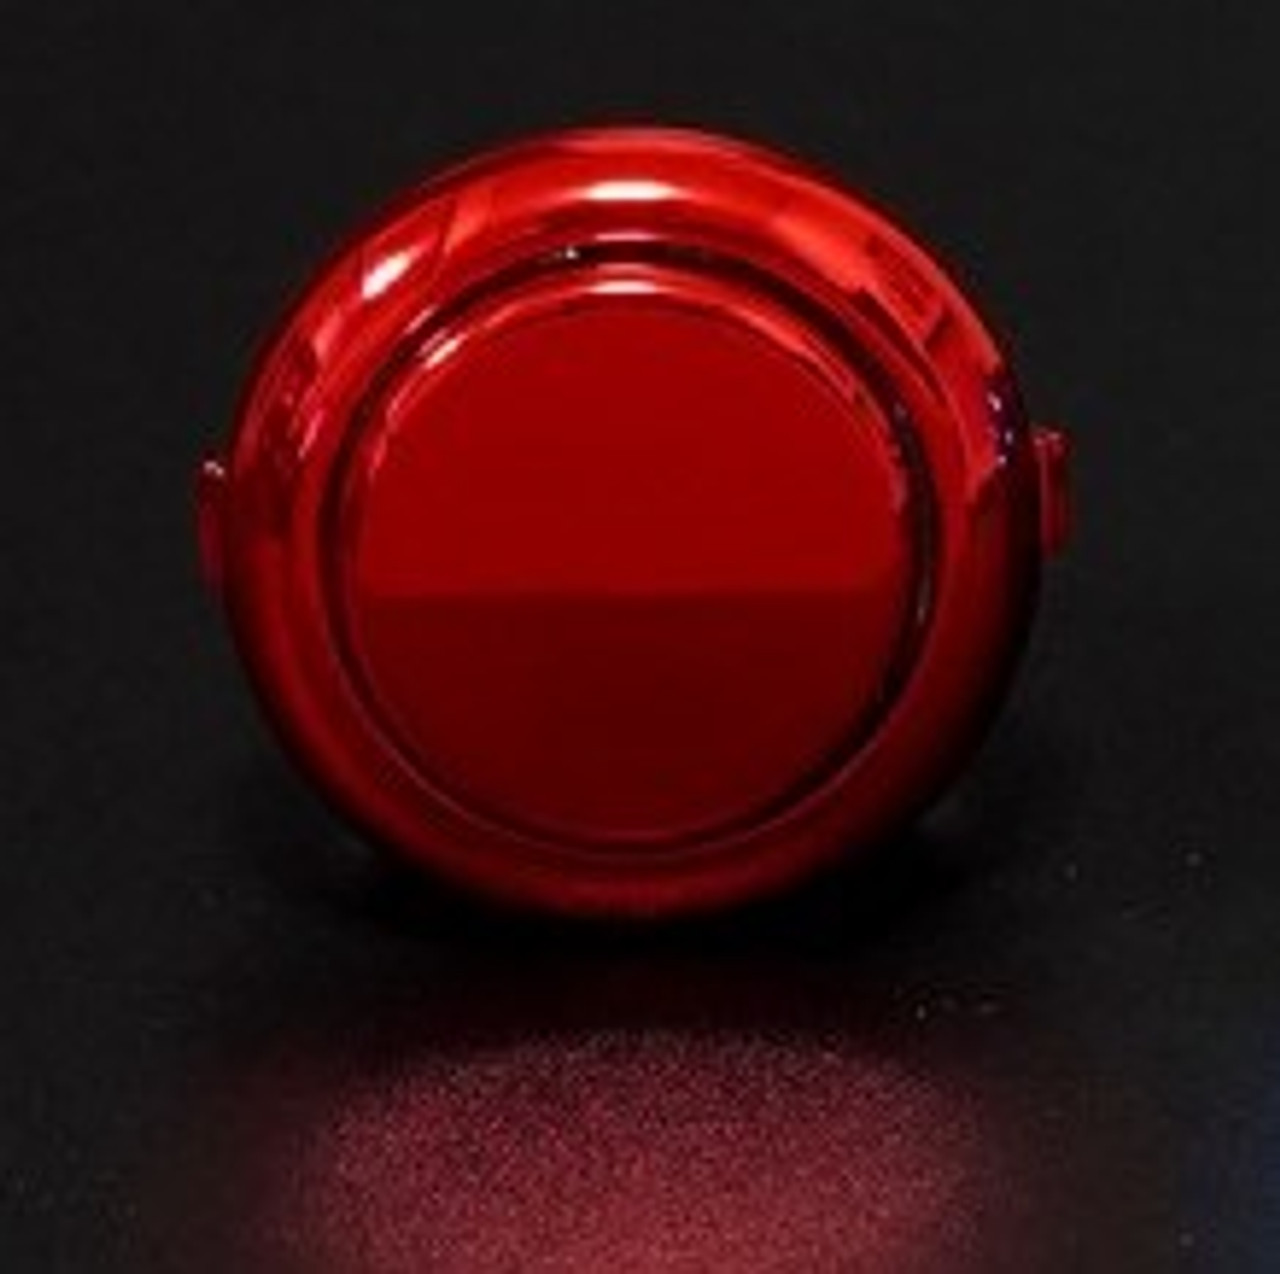 SANWA OBSC-24 PUSH BUTTON available at videogamesnewyork, vgny